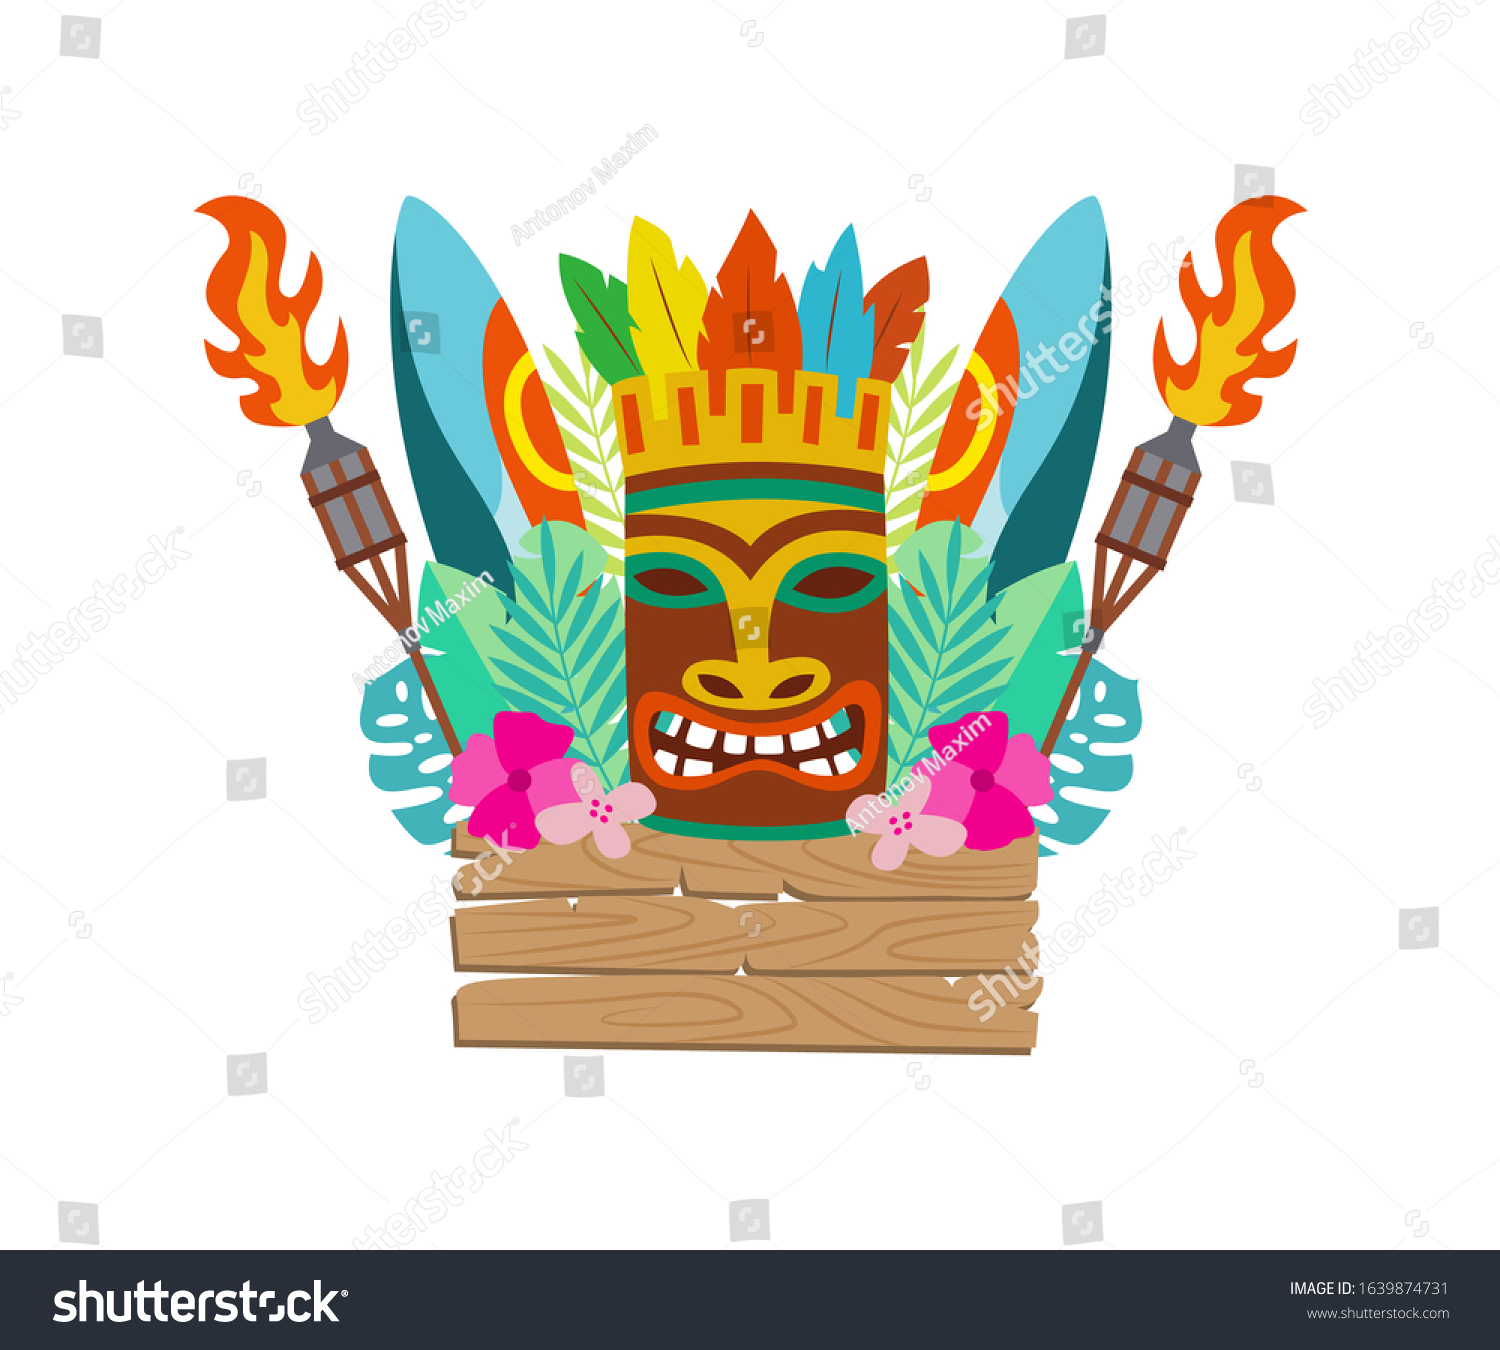 SVG of Luau Tiki polynesian wooden mask, surfboard and other items for Hawaiian holiday celebration, flat cartoon vector illustration isolated on white background. svg